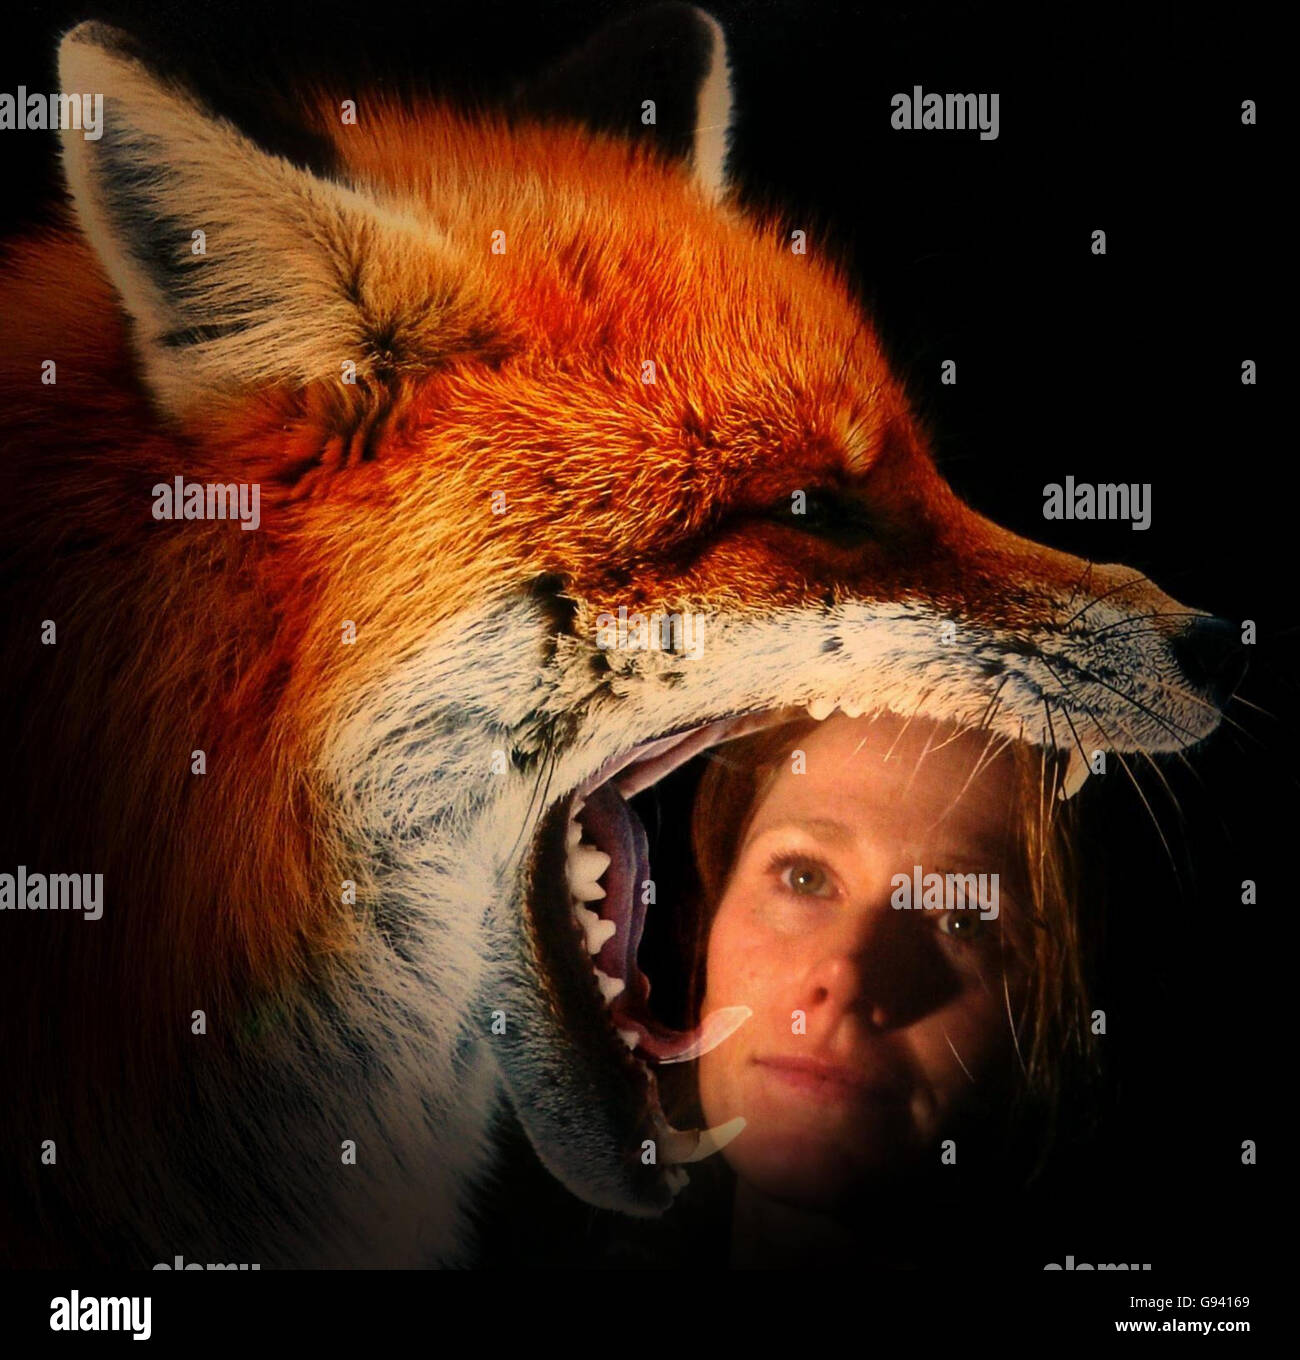 Visitor Nicola Semple is seen reflected in photograph Yawning Fox, part of the Wildlife Photographer of the Year exhibition that officially opens at Scotland Street School Museum in Glasgow on Sunday February 5, 2006. The competition is organised by the Natural History Museum and attracts entries from around the World. The exhibition is one of the museum's most successful and long running annual events aiming to promote stunning wildlife photography and to raise awareness into the importance of global concerns such as conservation, pollution and biodiversity. PRESS ASSOCIATION Photo. Photo Stock Photo